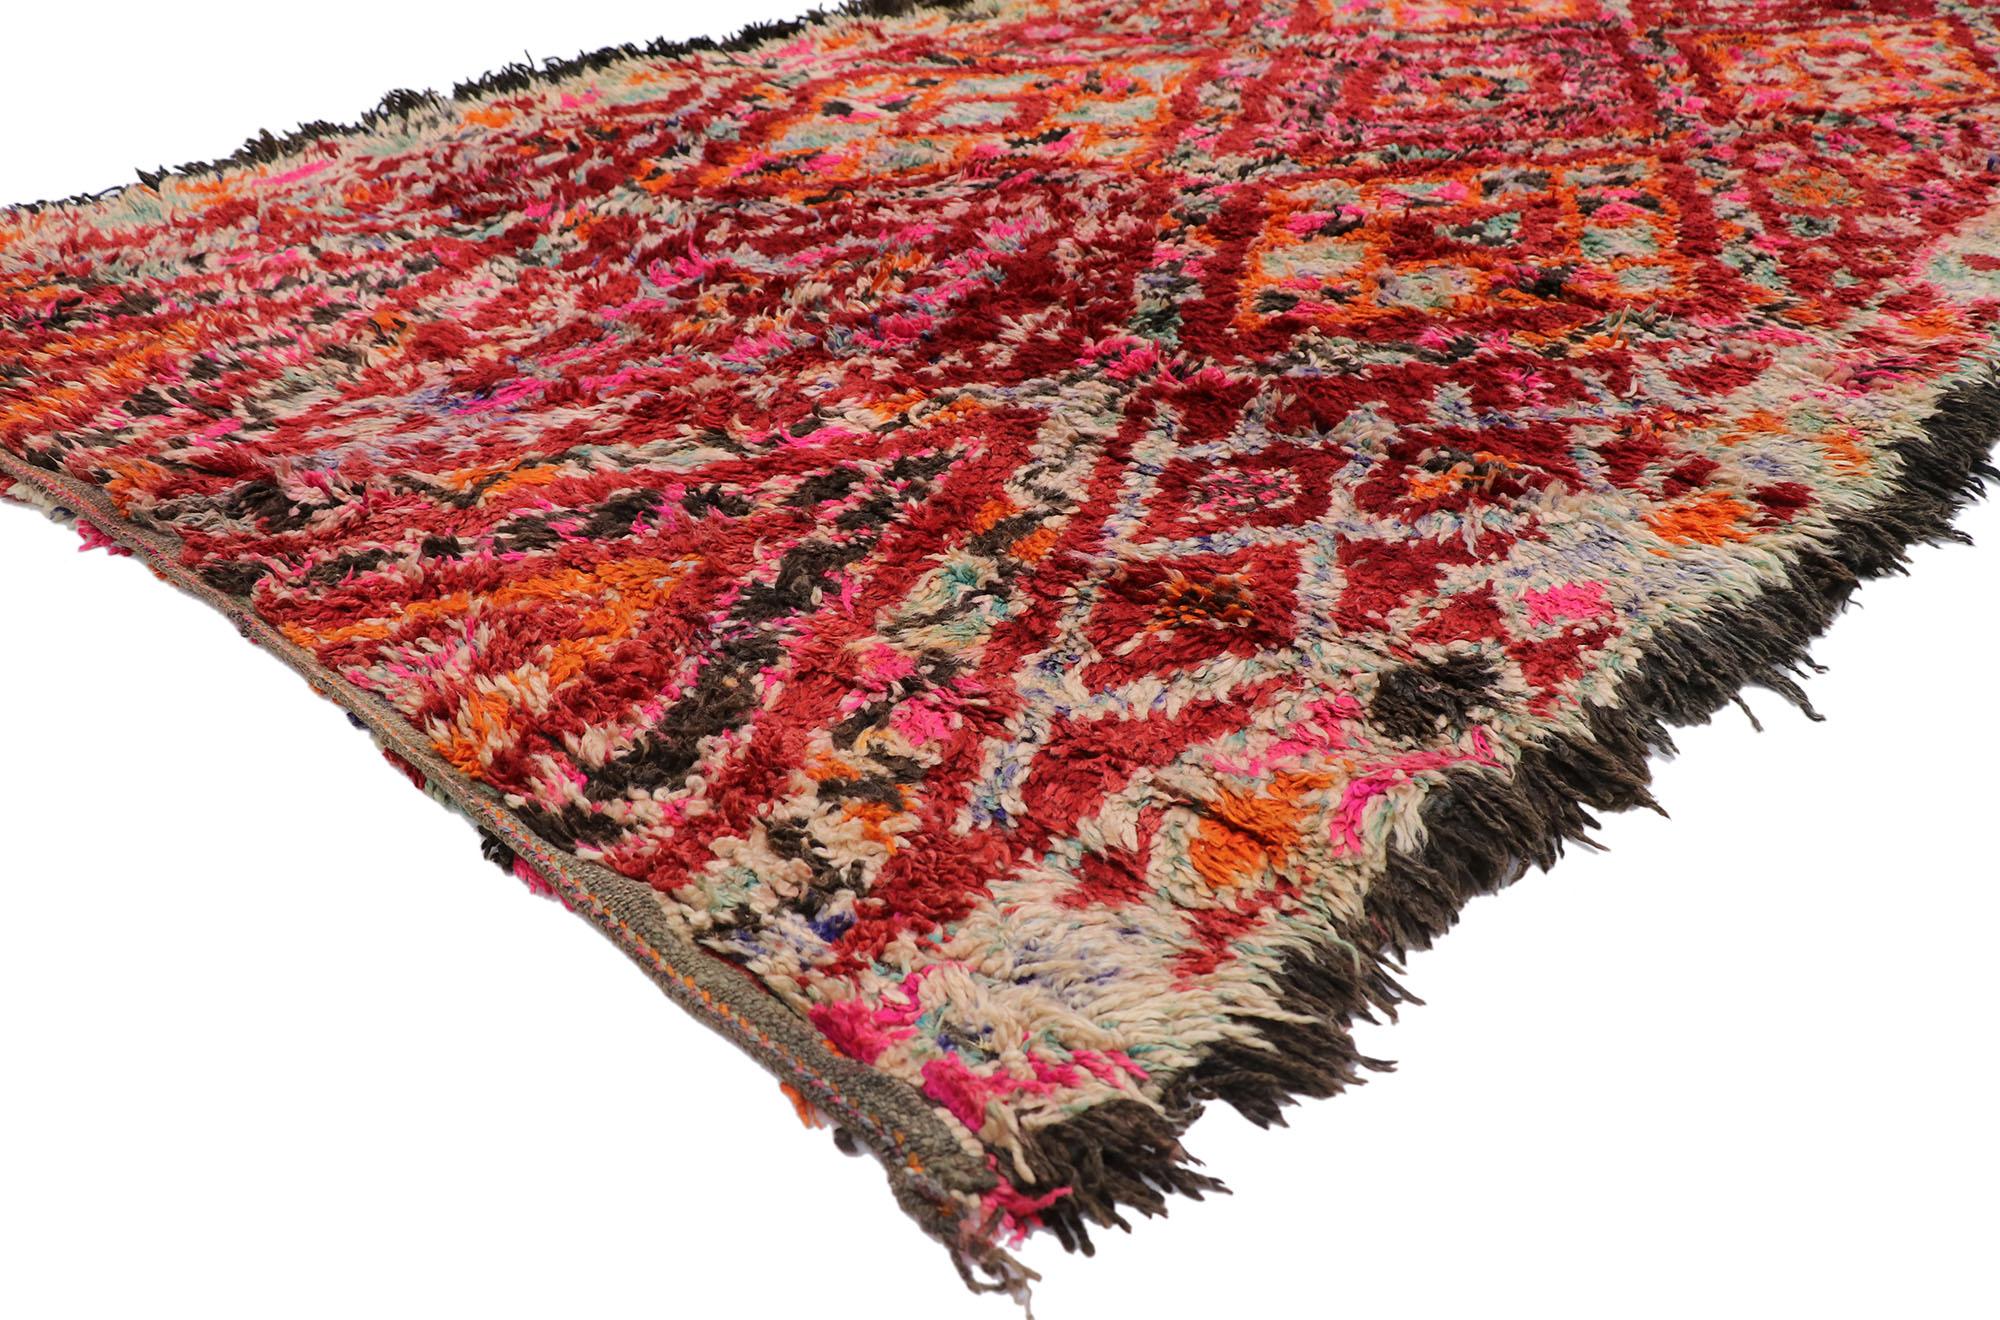 21275, vintage Berber Beni M'Guild Moroccan rug with Boho Chic Tribal style. Showcasing a bold expressive design, incredible detail and texture, this hand knotted wool vintage Berber Beni M'Guild Moroccan rug is a captivating vision of woven beauty.